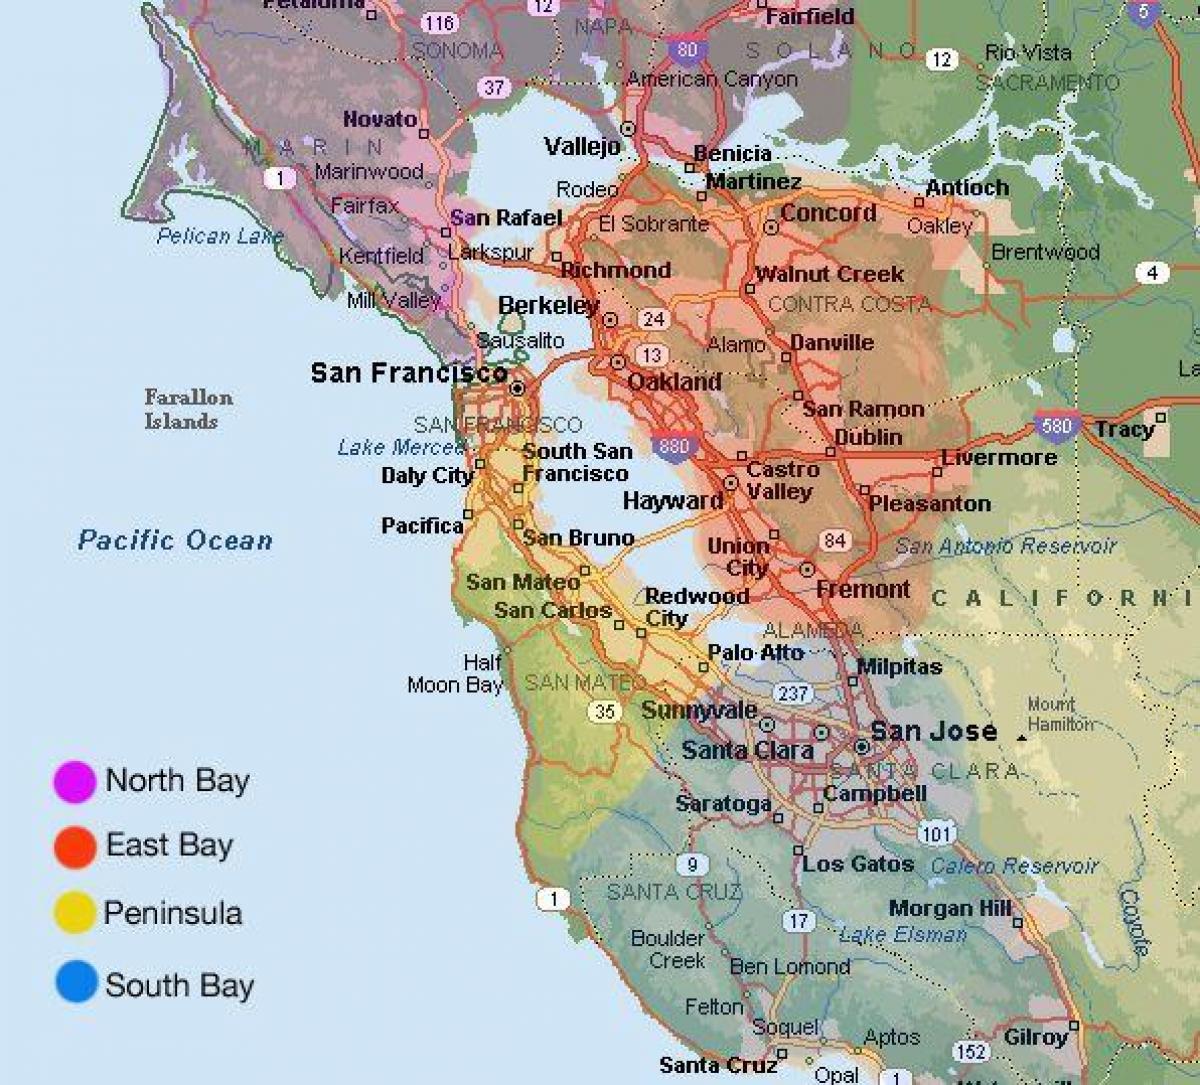 San Francisco area map and surrounding area